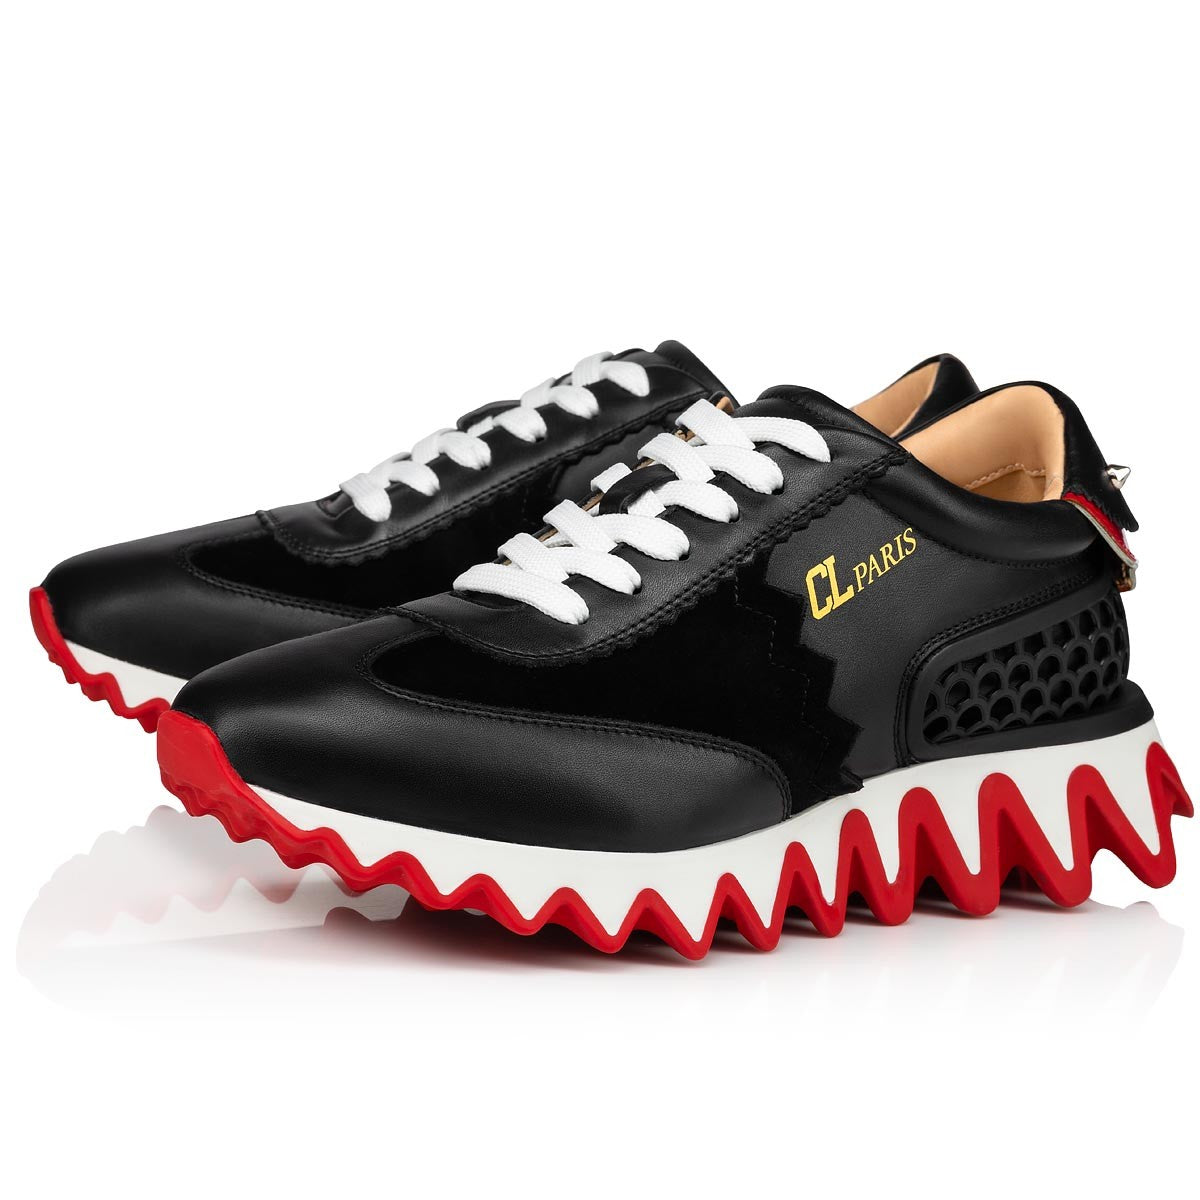 Loubishark Woman Calf Leather and Veau Velours Black Sneakers